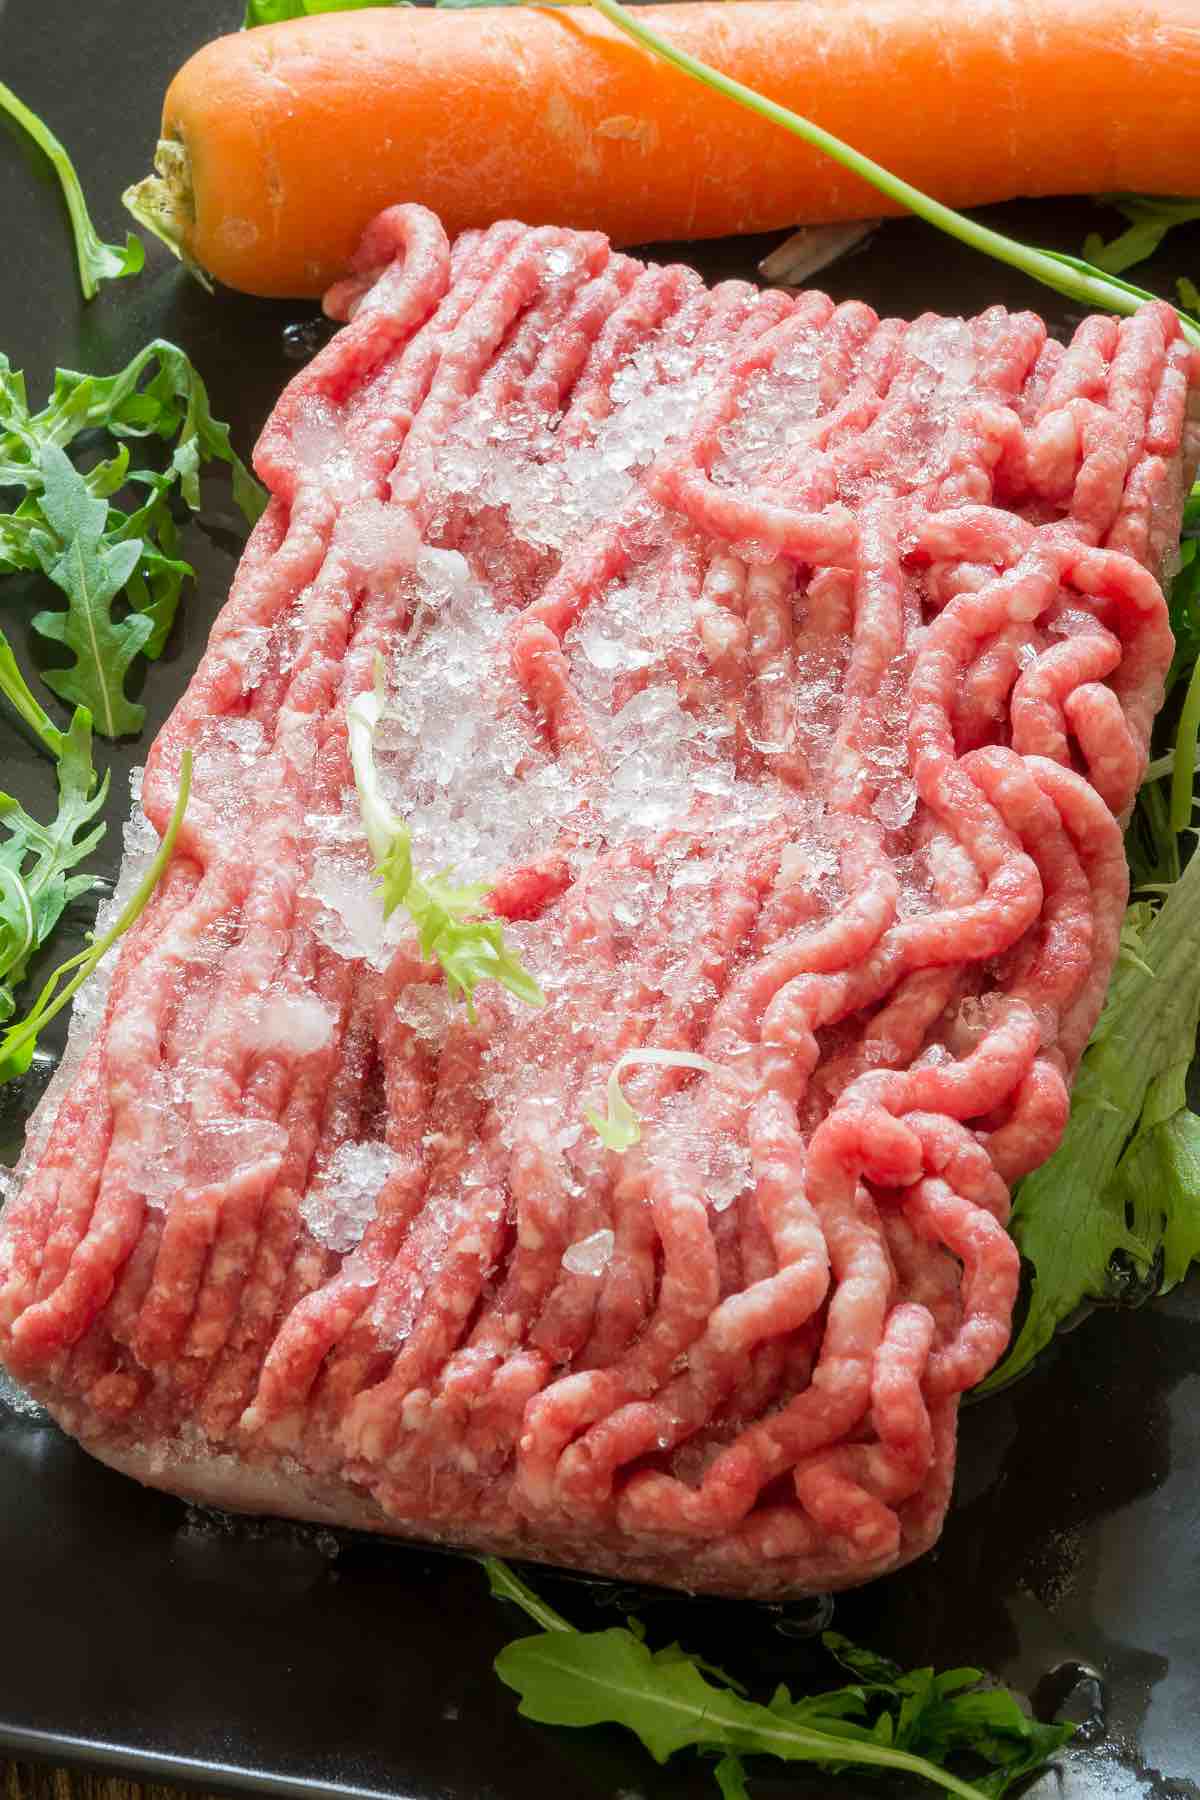 It’s almost dinner time, and your ground beef is still in the freezer. Before you can get cooking, the beef has to be completely defrosted. Raw meat has to be thawed safely, to prevent the growth of harmful bacteria. We’ll share with you 4 safe and easy ways to defrost frozen ground beef.